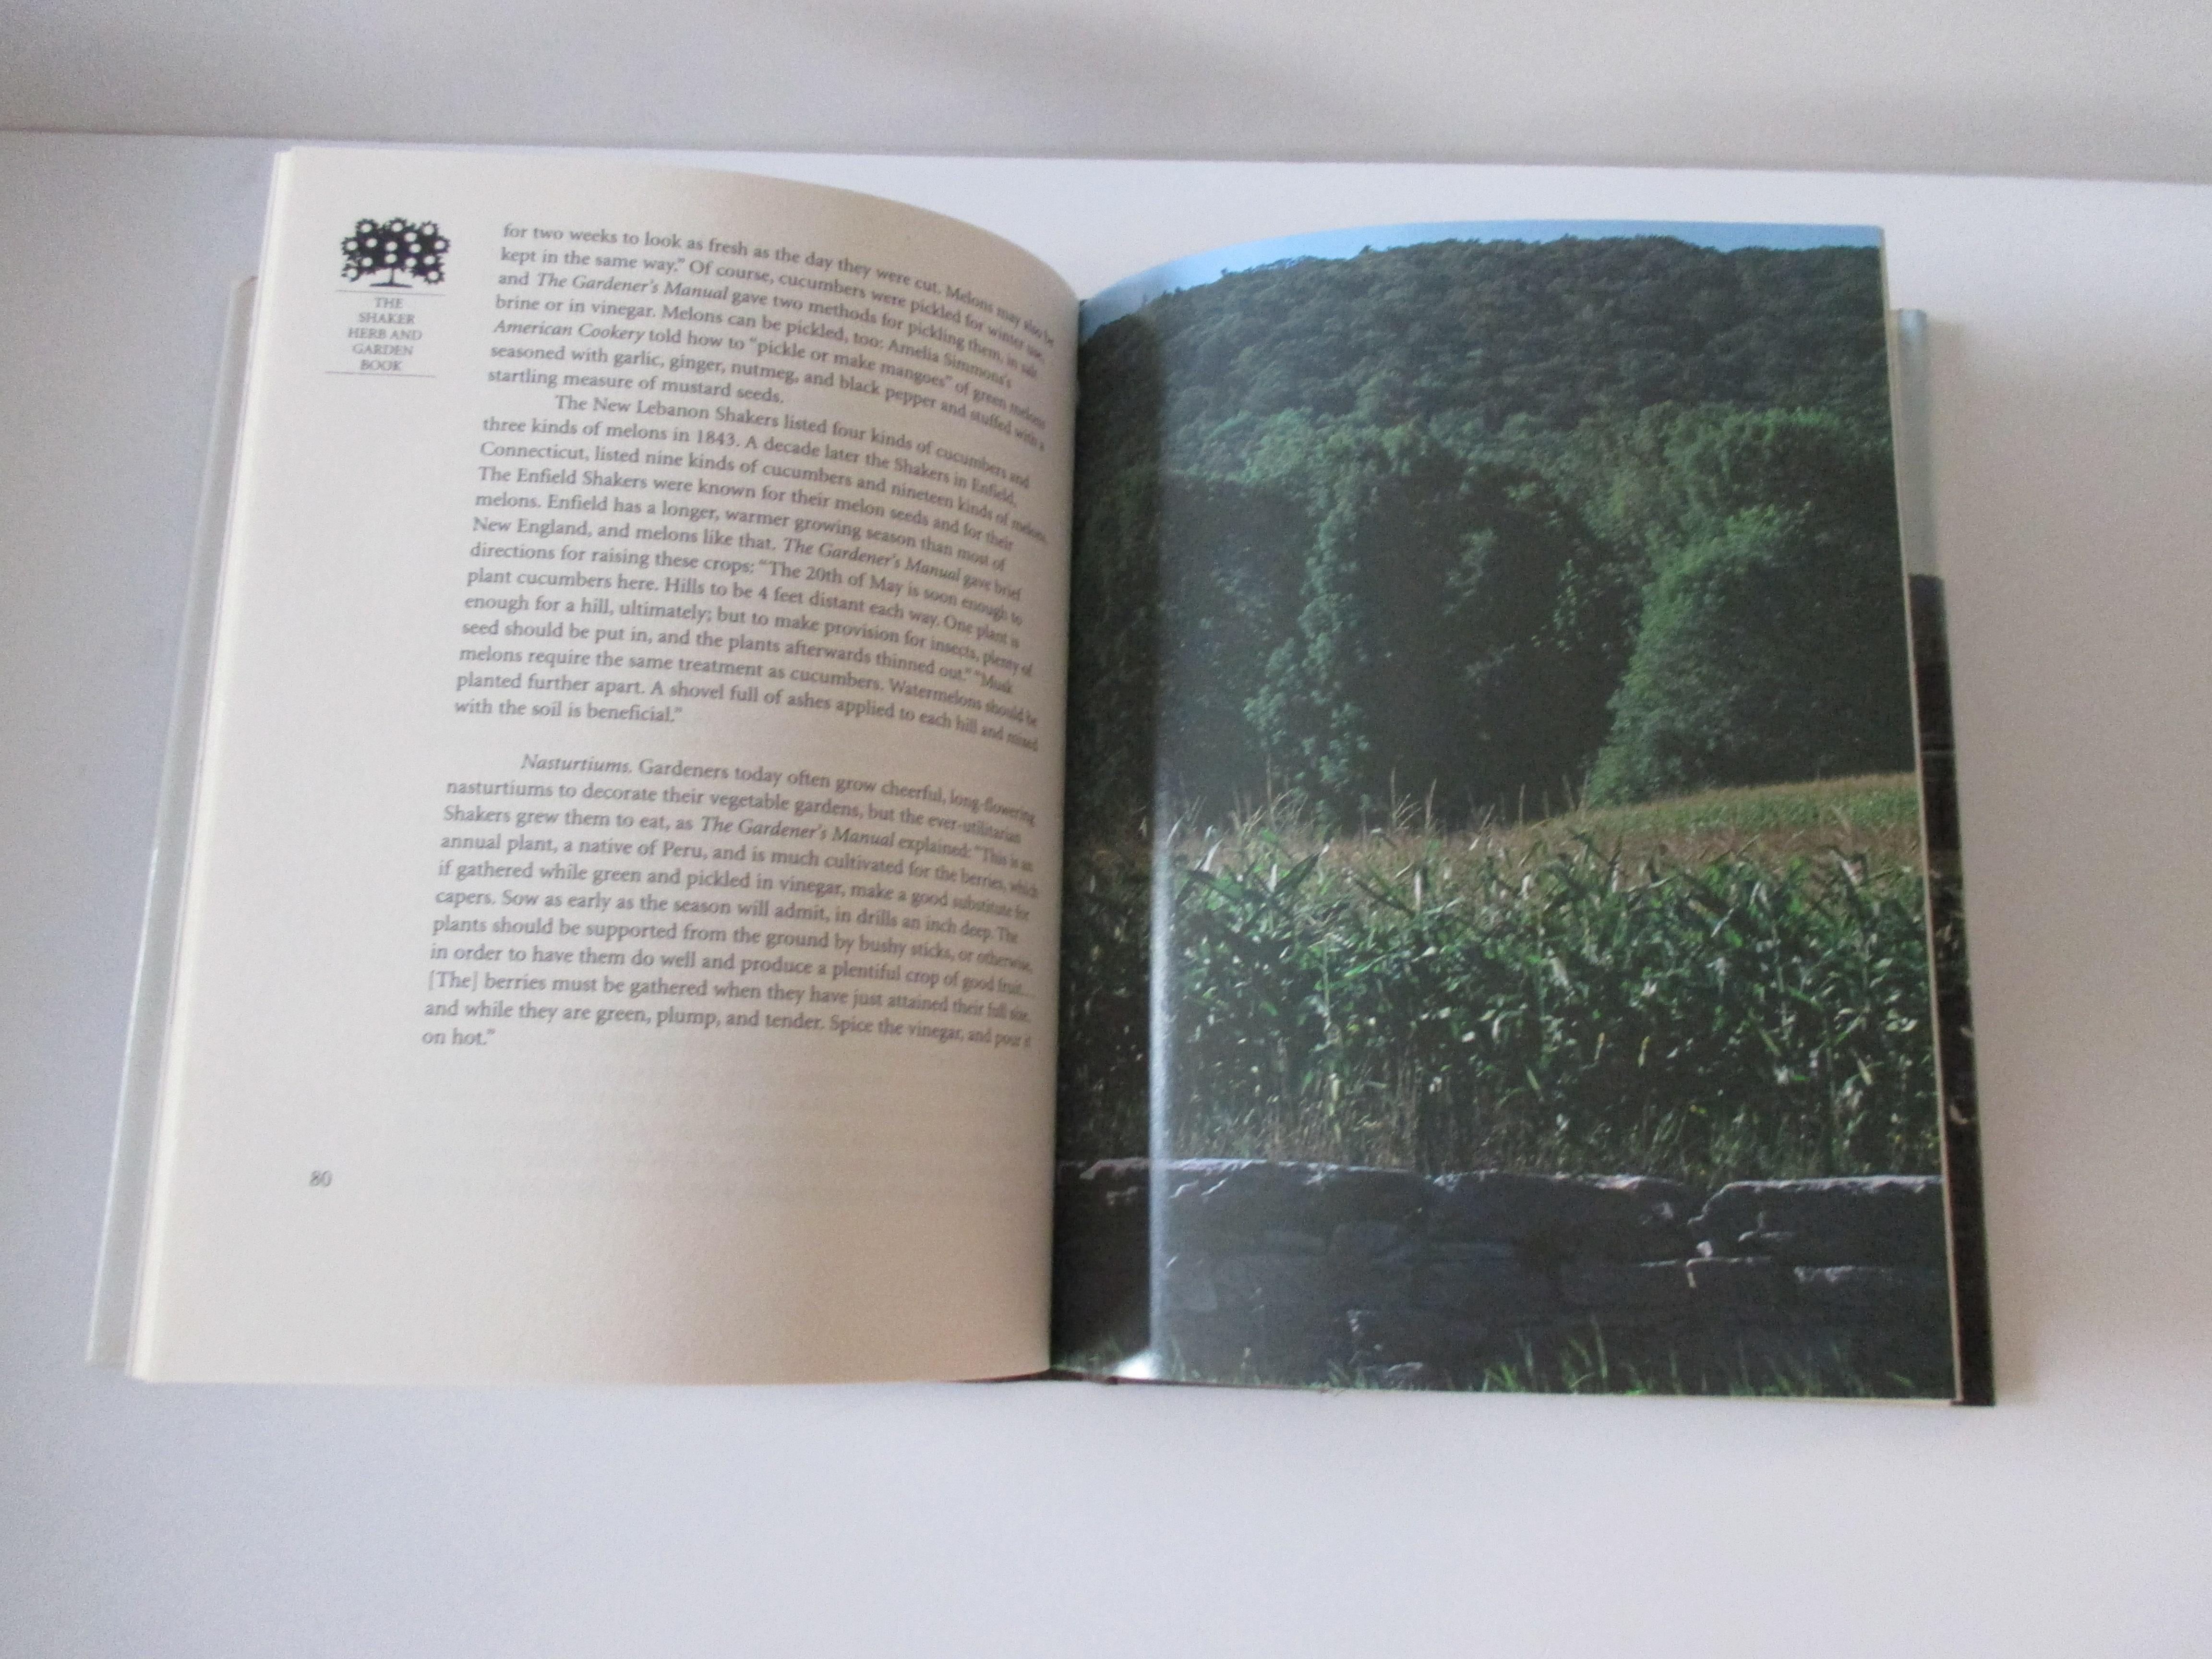 The Shaker Herb and Garden vintage book by R. Buchannan
160 pages
Measures: 7 x 9 x 0.25
USA 1996.